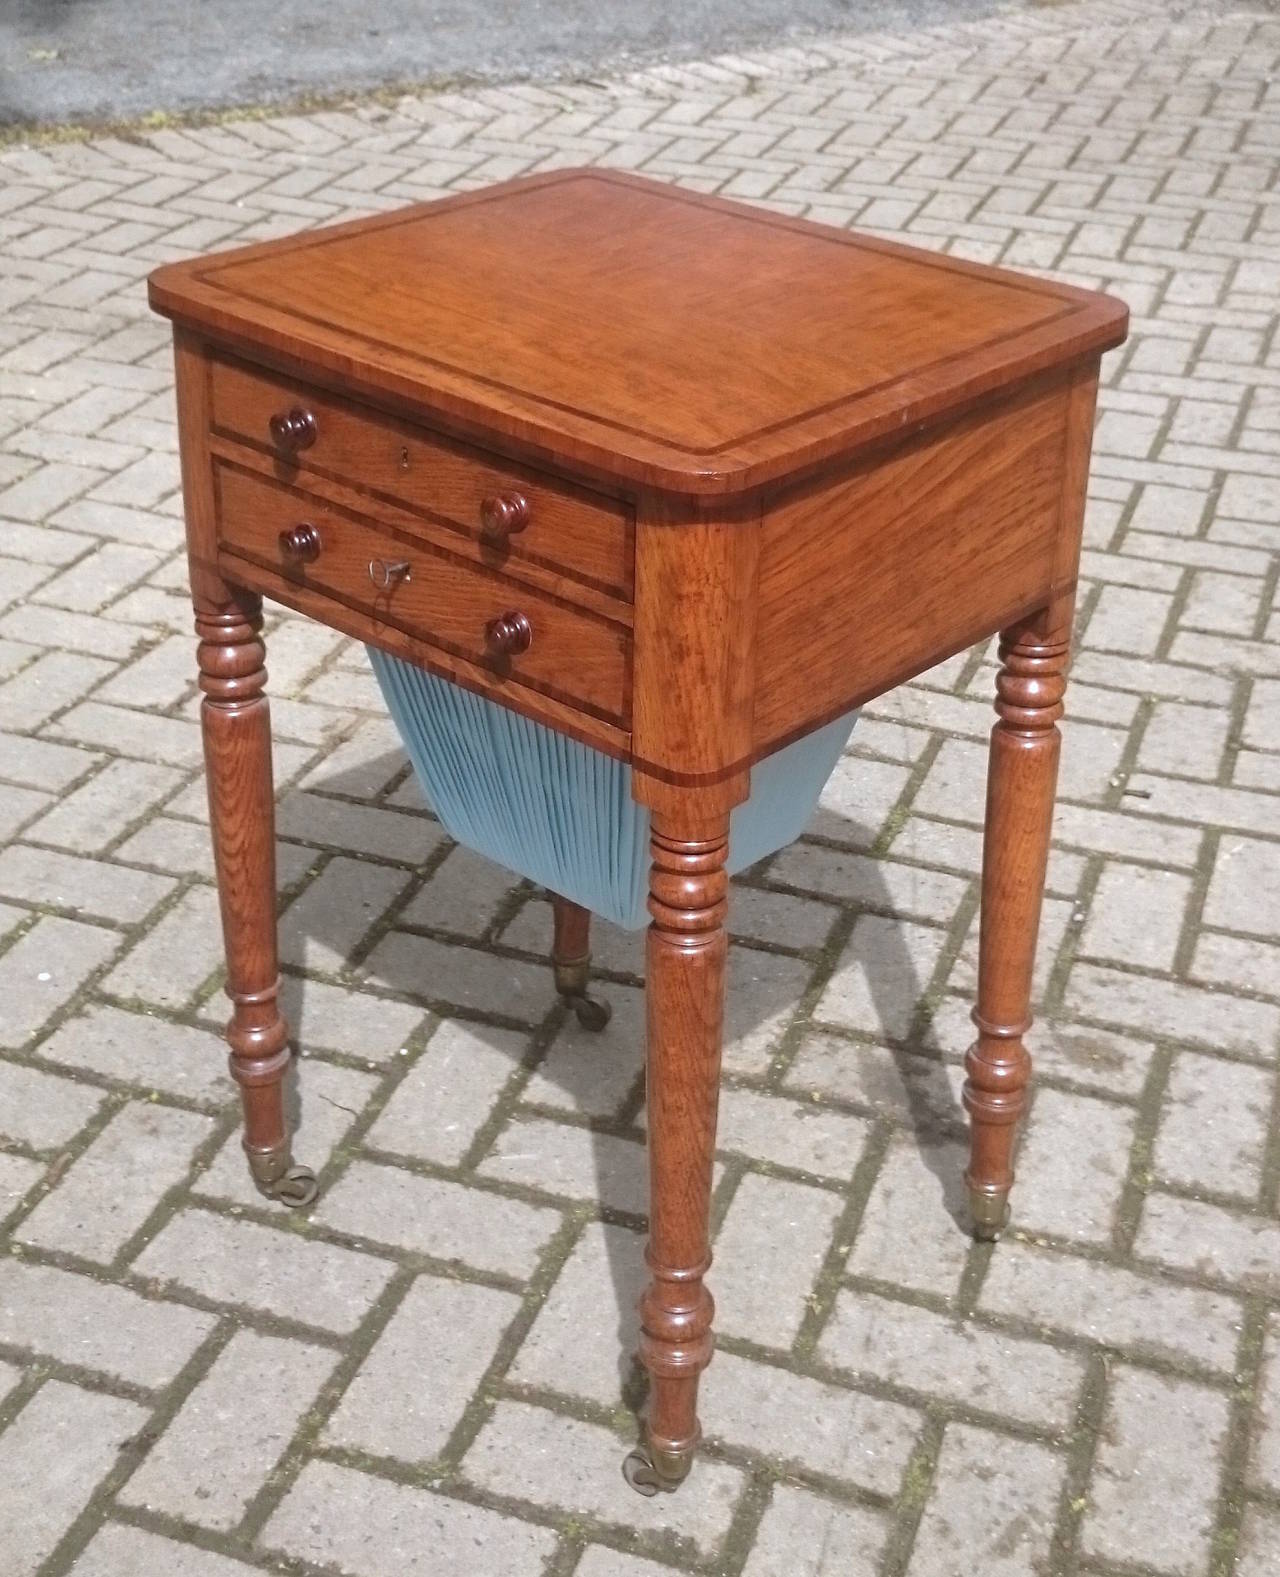 Antique work box / sewing table made of a choice cut of oak with crossbanding made of top quality rosewood. This is a very rare combination of timbers and especially for this period. Bear in mind that this is not vernacular piece and neither was it